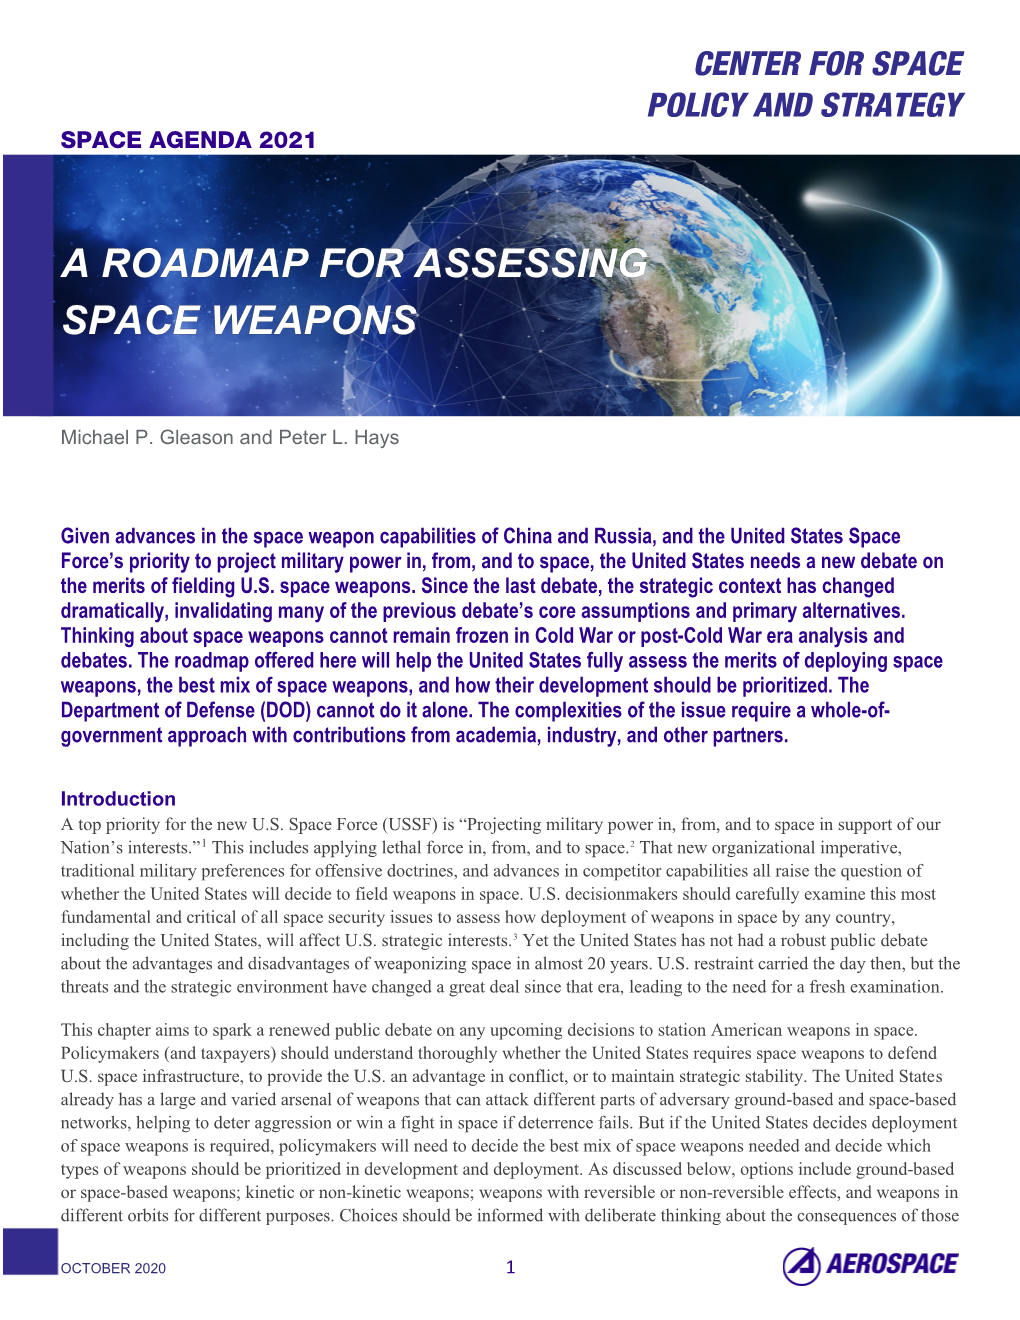 A Roadmap for Assessing Space Weapons